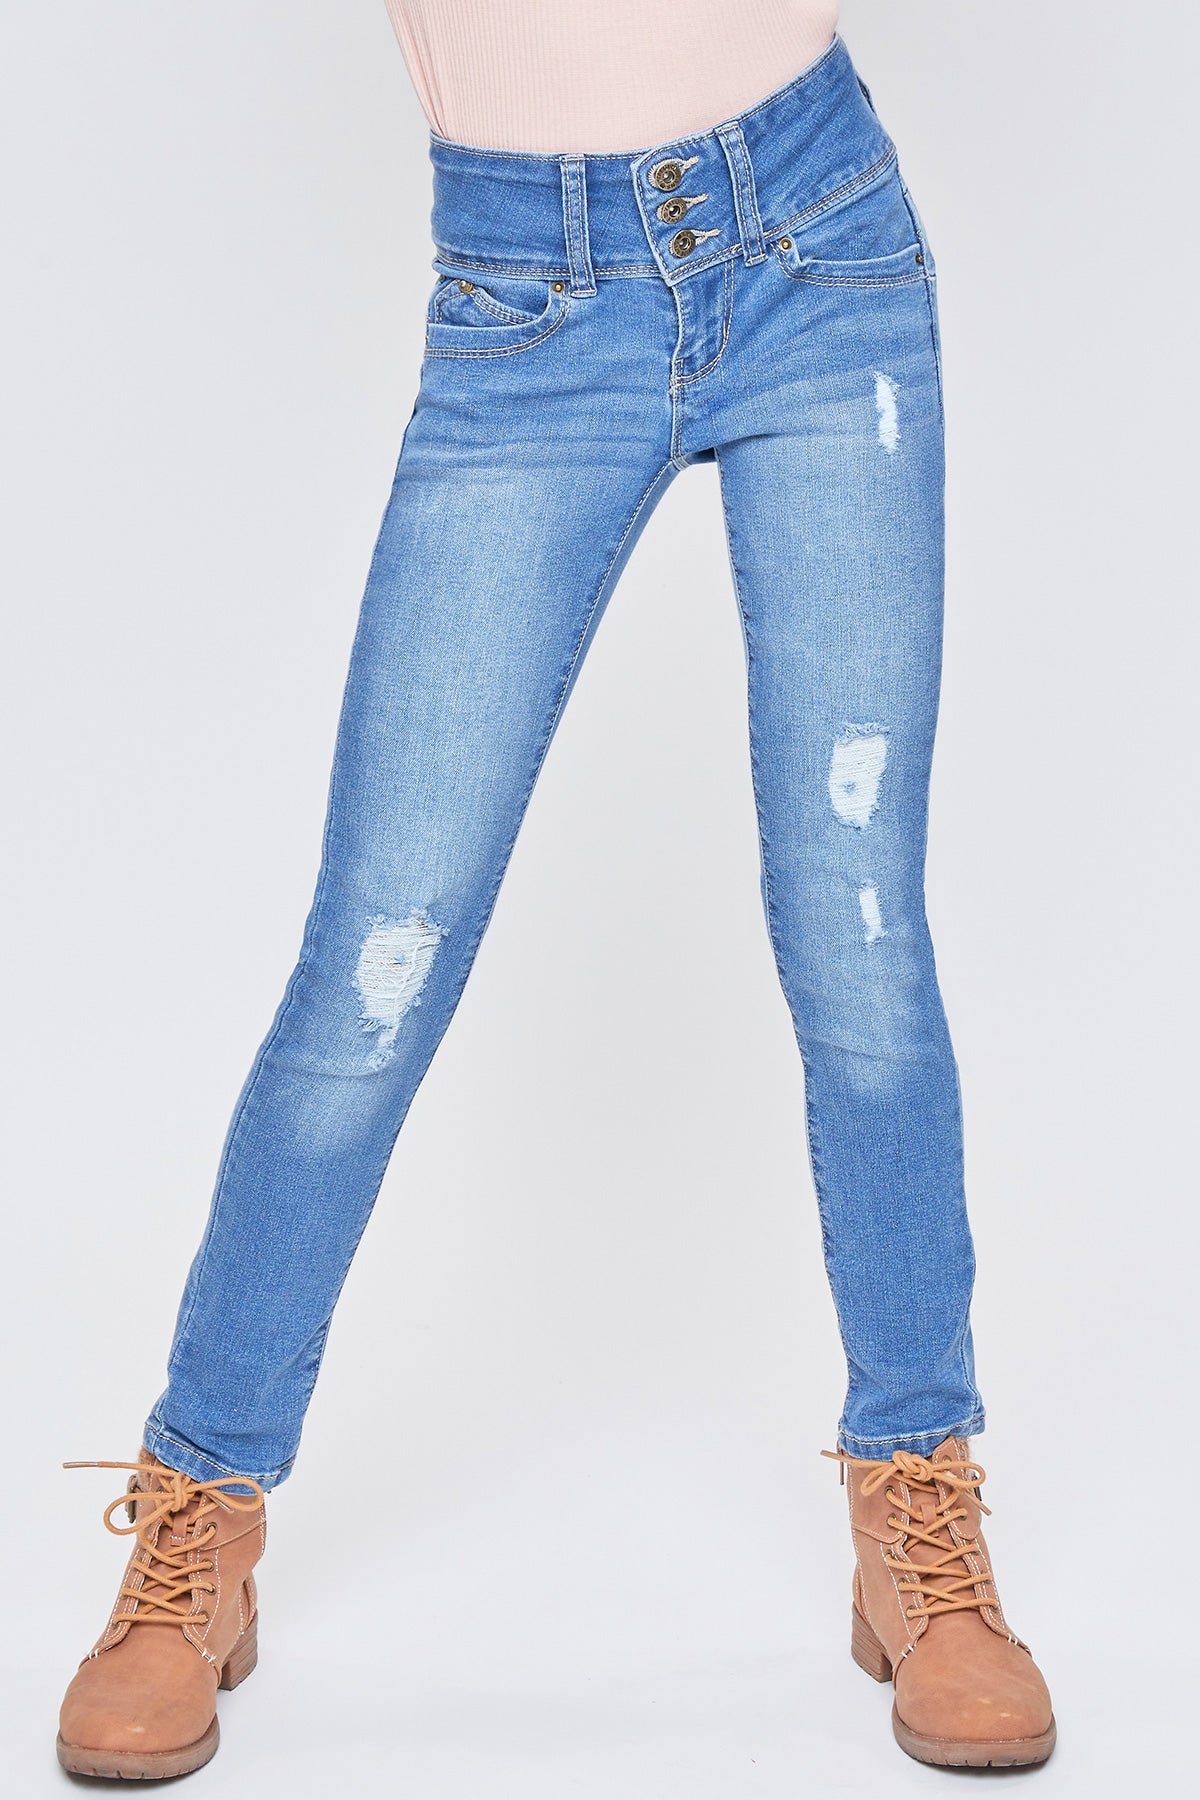 Missy Hyperdenim Super Stretchy Basic Skinny Jean , Pack Of 6 from Royalty for Me